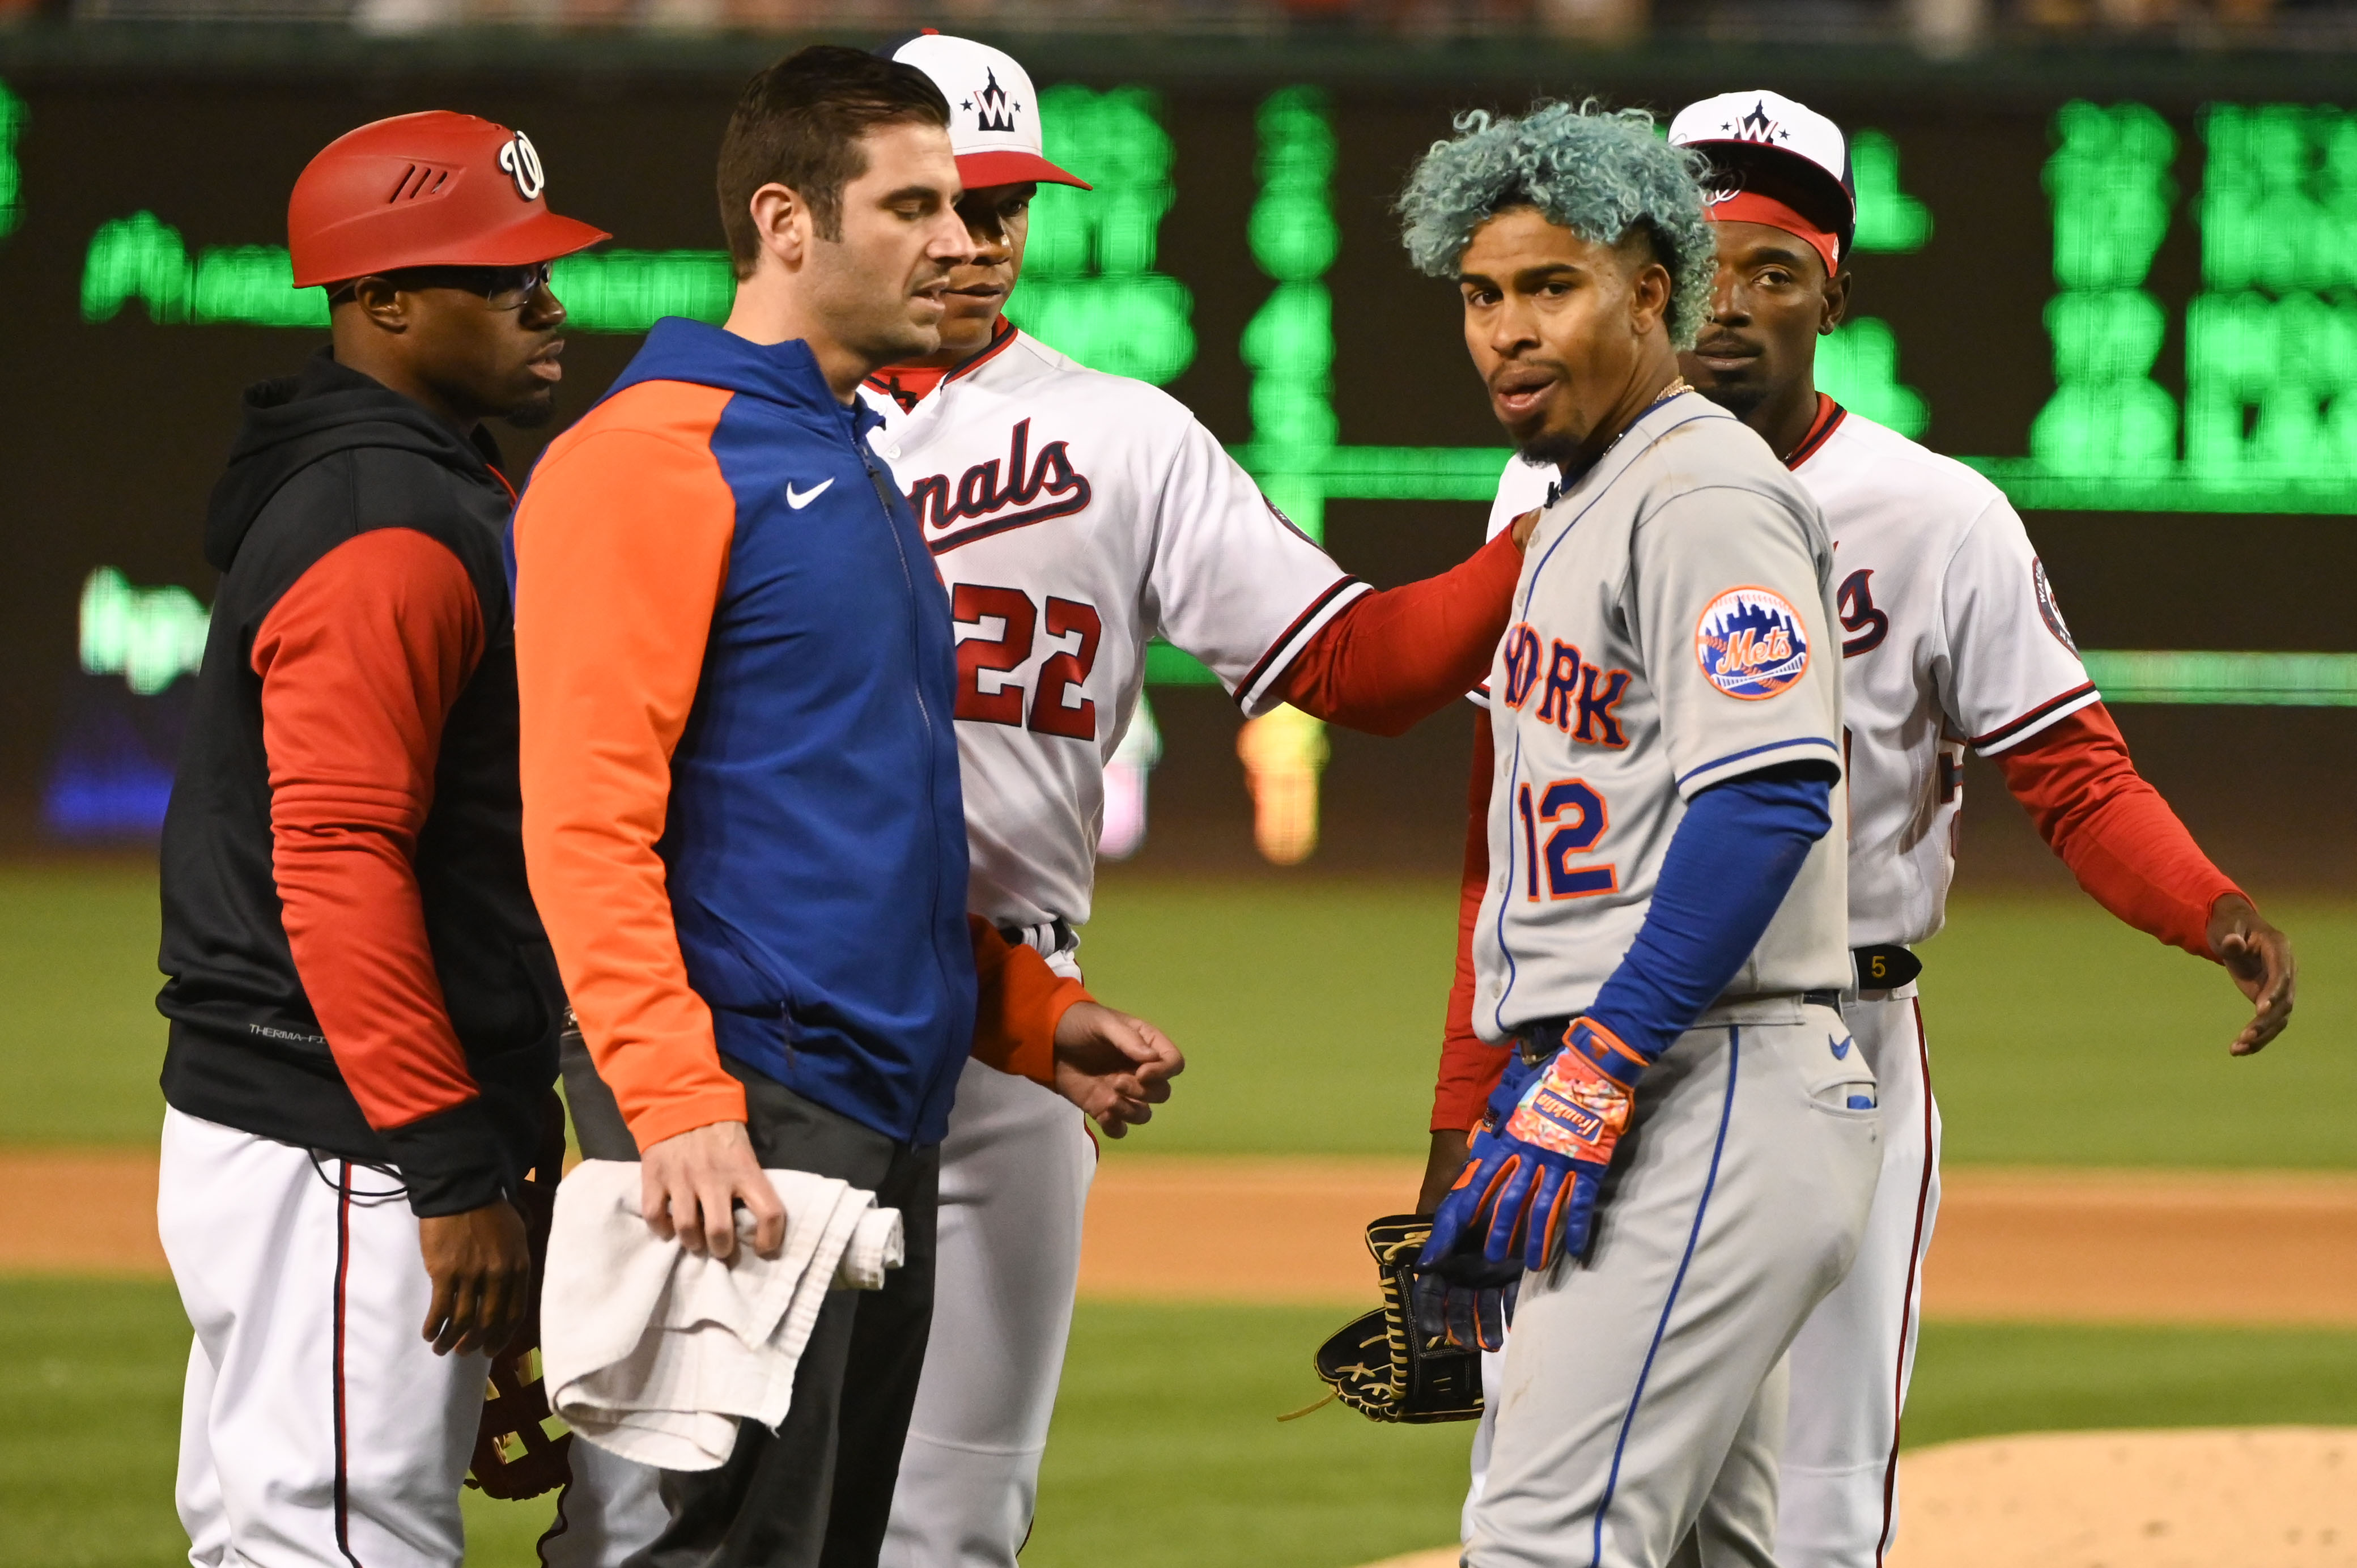 Like Mets, Francisco Lindor is rejuvenated in 2022 - Newsday